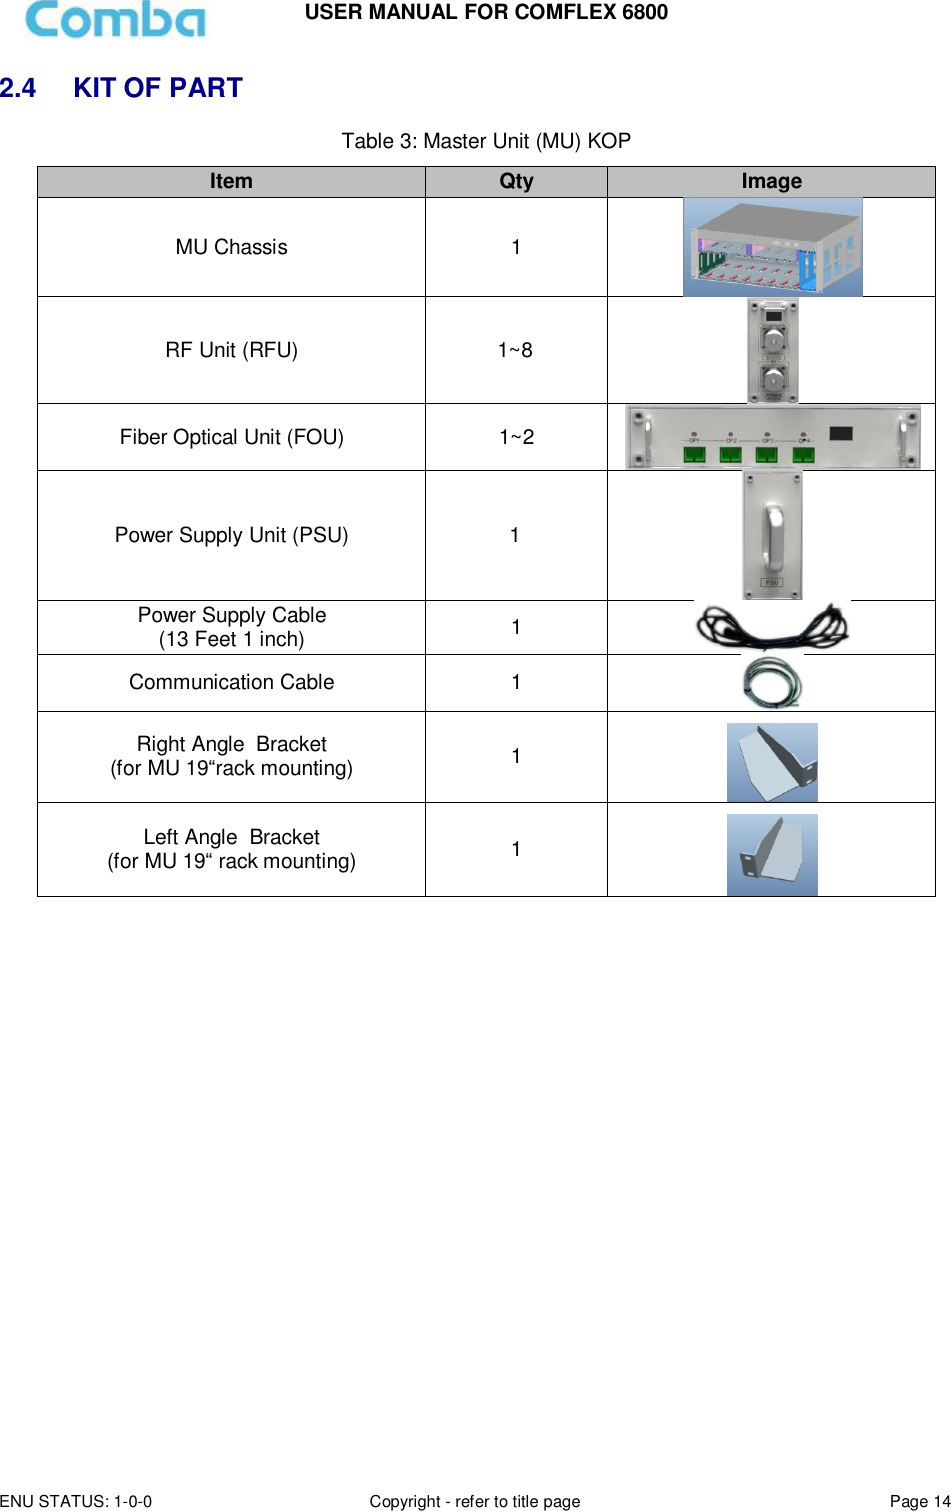 USER MANUAL FOR COMFLEX 6800 ENU STATUS: 1-0-0 Copyright - refer to title page Page 14  2.4  KIT OF PART Table 3: Master Unit (MU) KOP Item Qty Image MU Chassis 1  RF Unit (RFU) 1~8  Fiber Optical Unit (FOU) 1~2  Power Supply Unit (PSU) 1  Power Supply Cable (13 Feet 1 inch) 1  Communication Cable 1  Right Angle  Bracket (for MU 19“rack mounting) 1   Left Angle  Bracket (for MU 19“ rack mounting) 1    